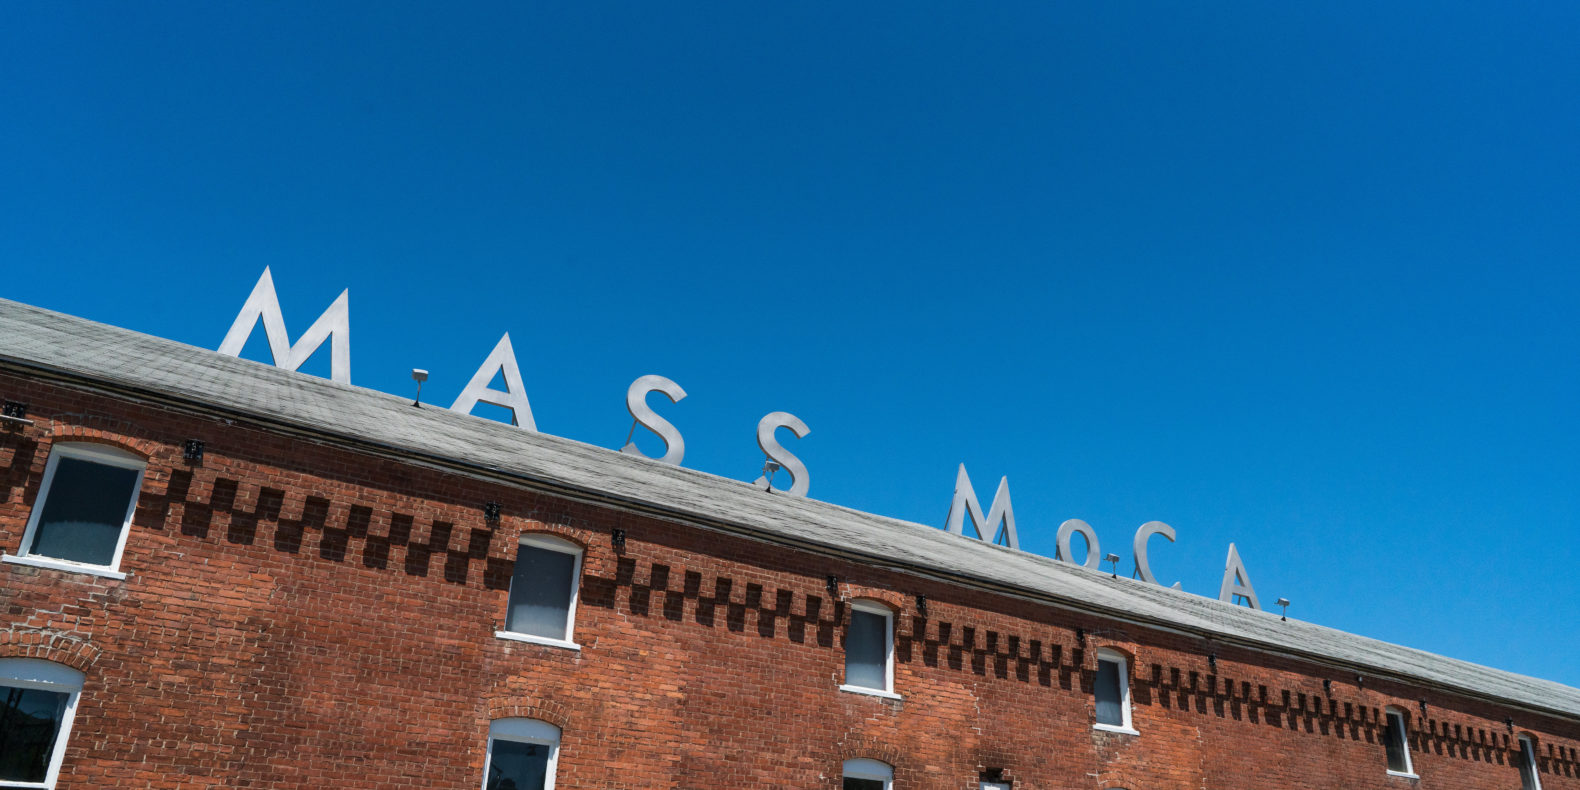 Angled up view of brick building with MASS MoCA sign and blue sky above